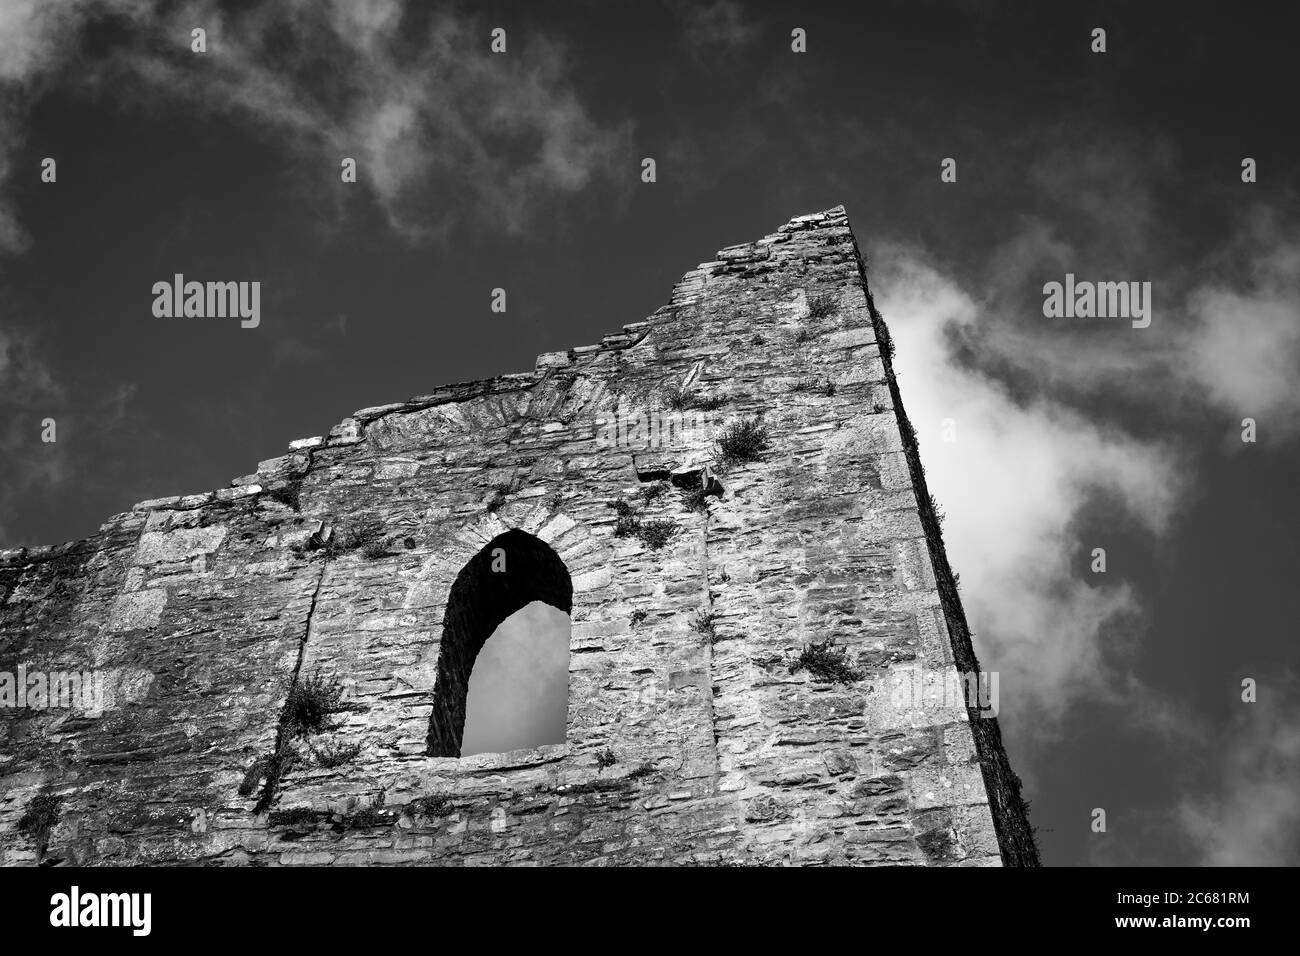 Nahaufnahme der Maynooth Castle Ruin, Maynooth, County Kildare, Irland Stockfoto